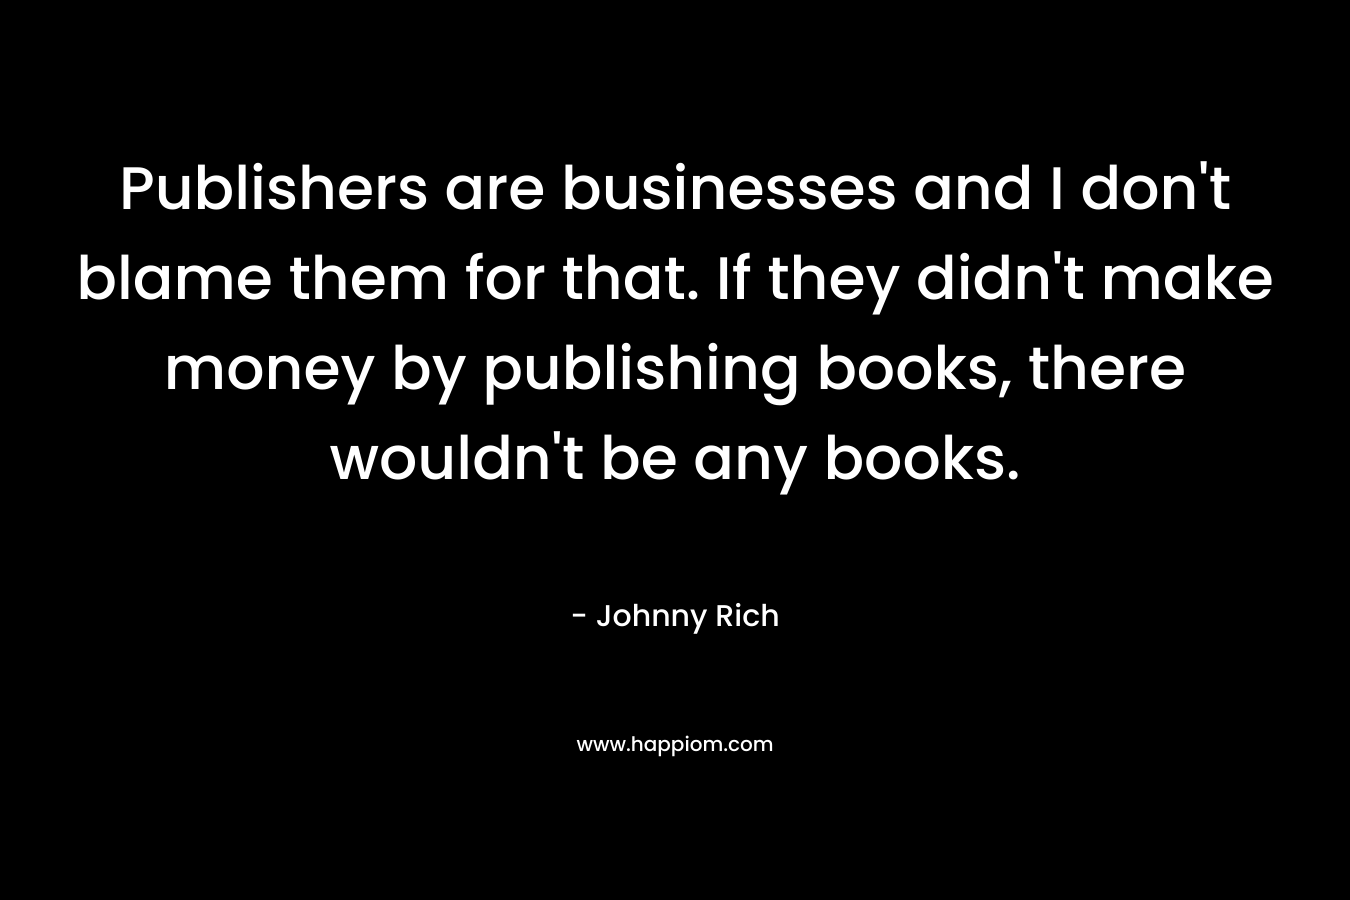 Publishers are businesses and I don’t blame them for that. If they didn’t make money by publishing books, there wouldn’t be any books. – Johnny Rich